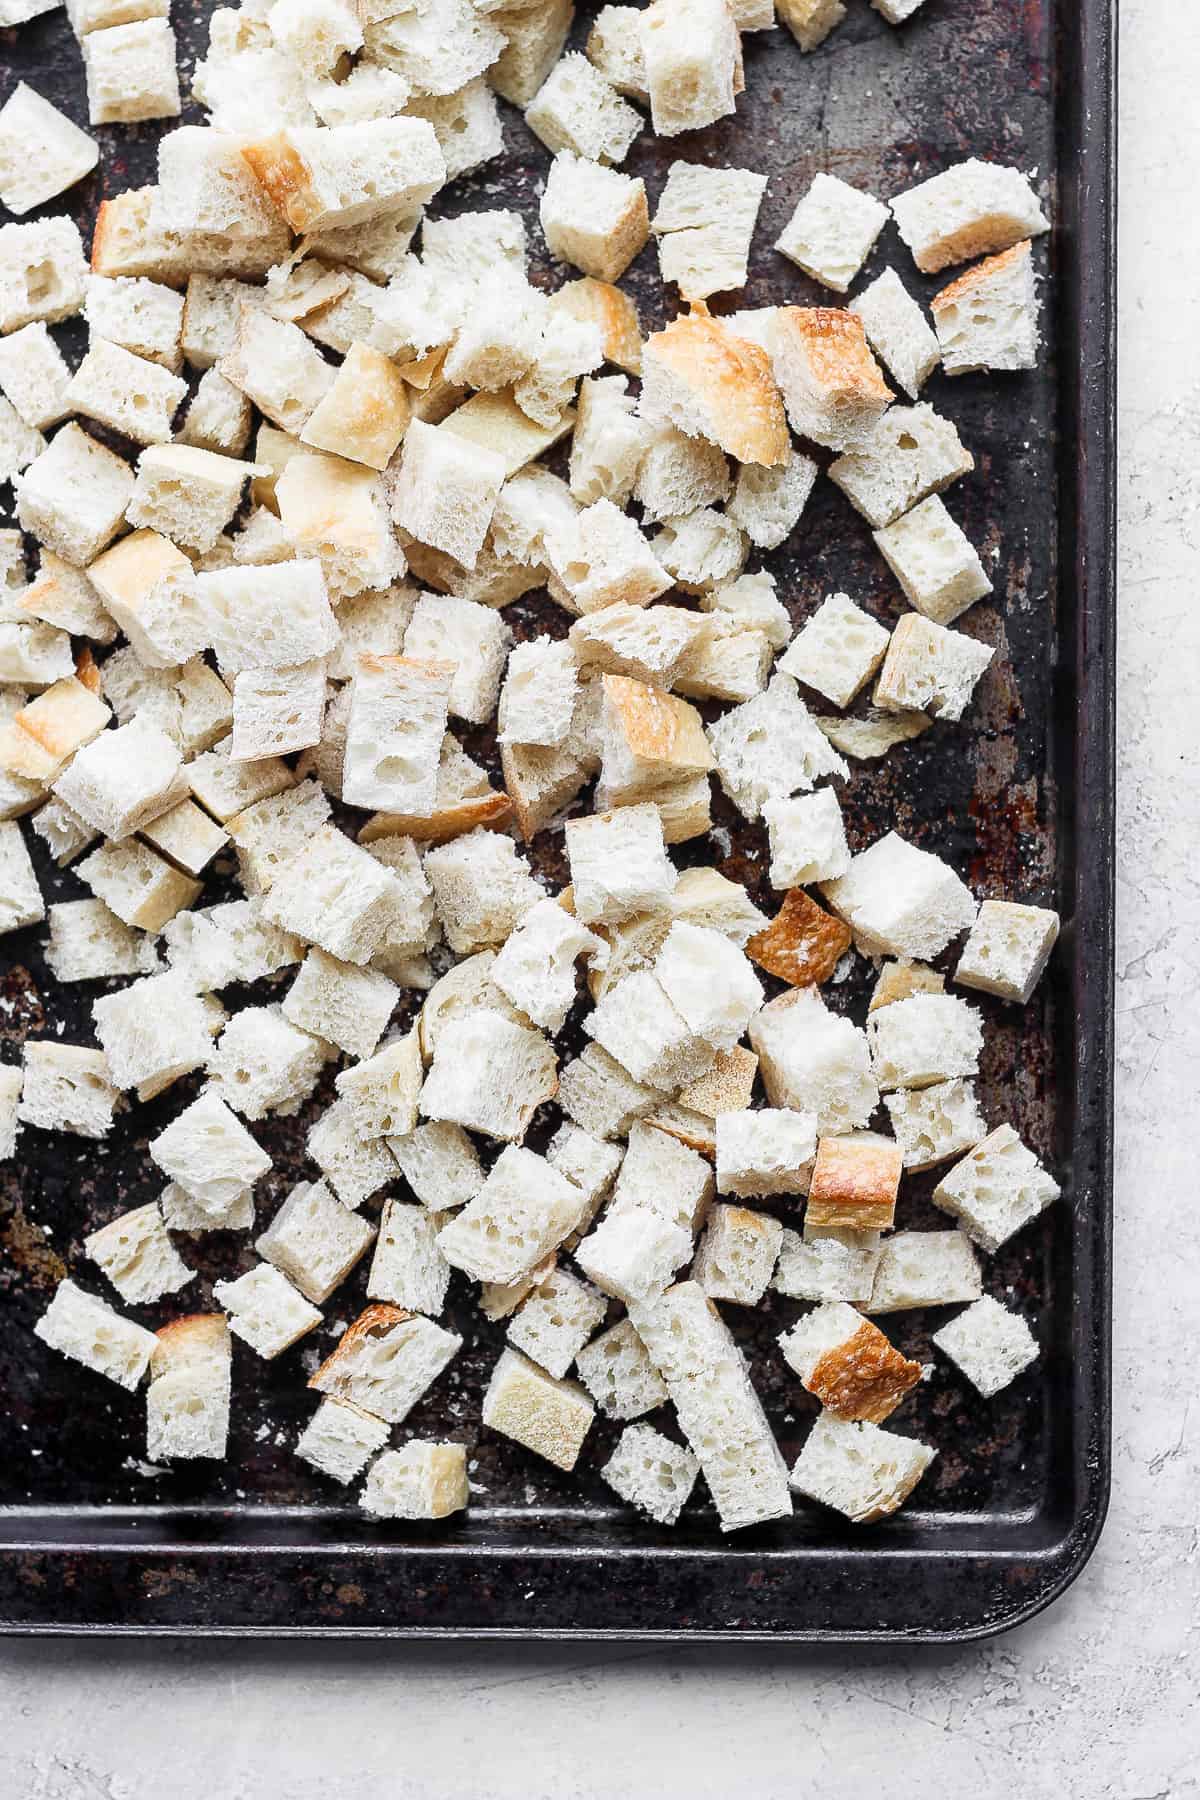 Bread cubes on a tray air drying